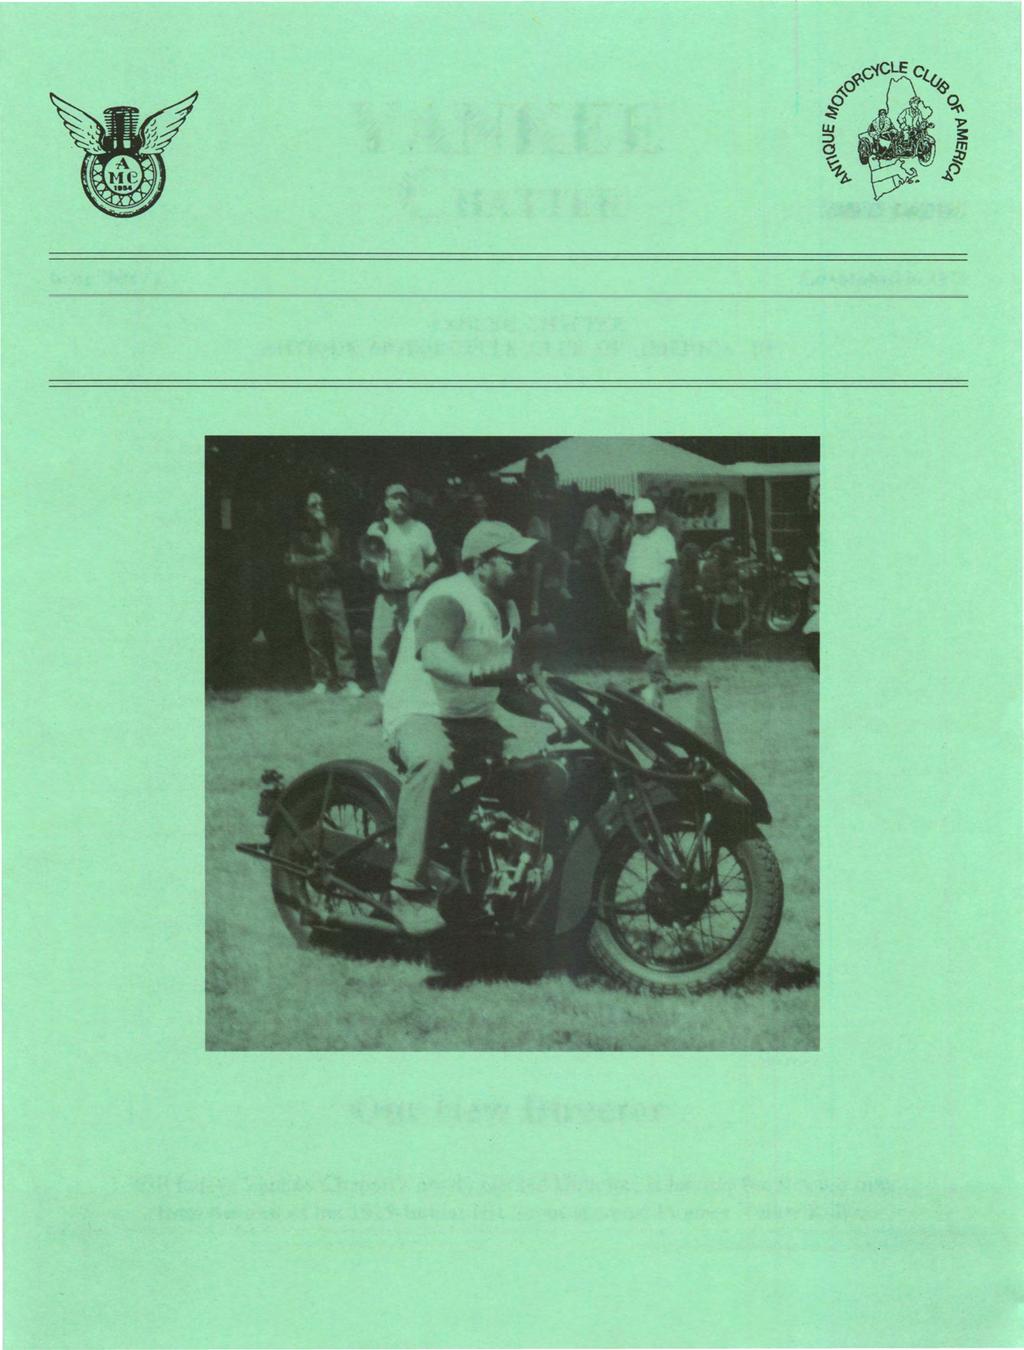 YANKEE CHATTER YANKEE CHAPTER Issue 2004 I 1 Established in 1973 YANKEE CHAPTER ANTIQUE MOTORCYCLE CLUB OF AMERICA, INC. Our New Director C.